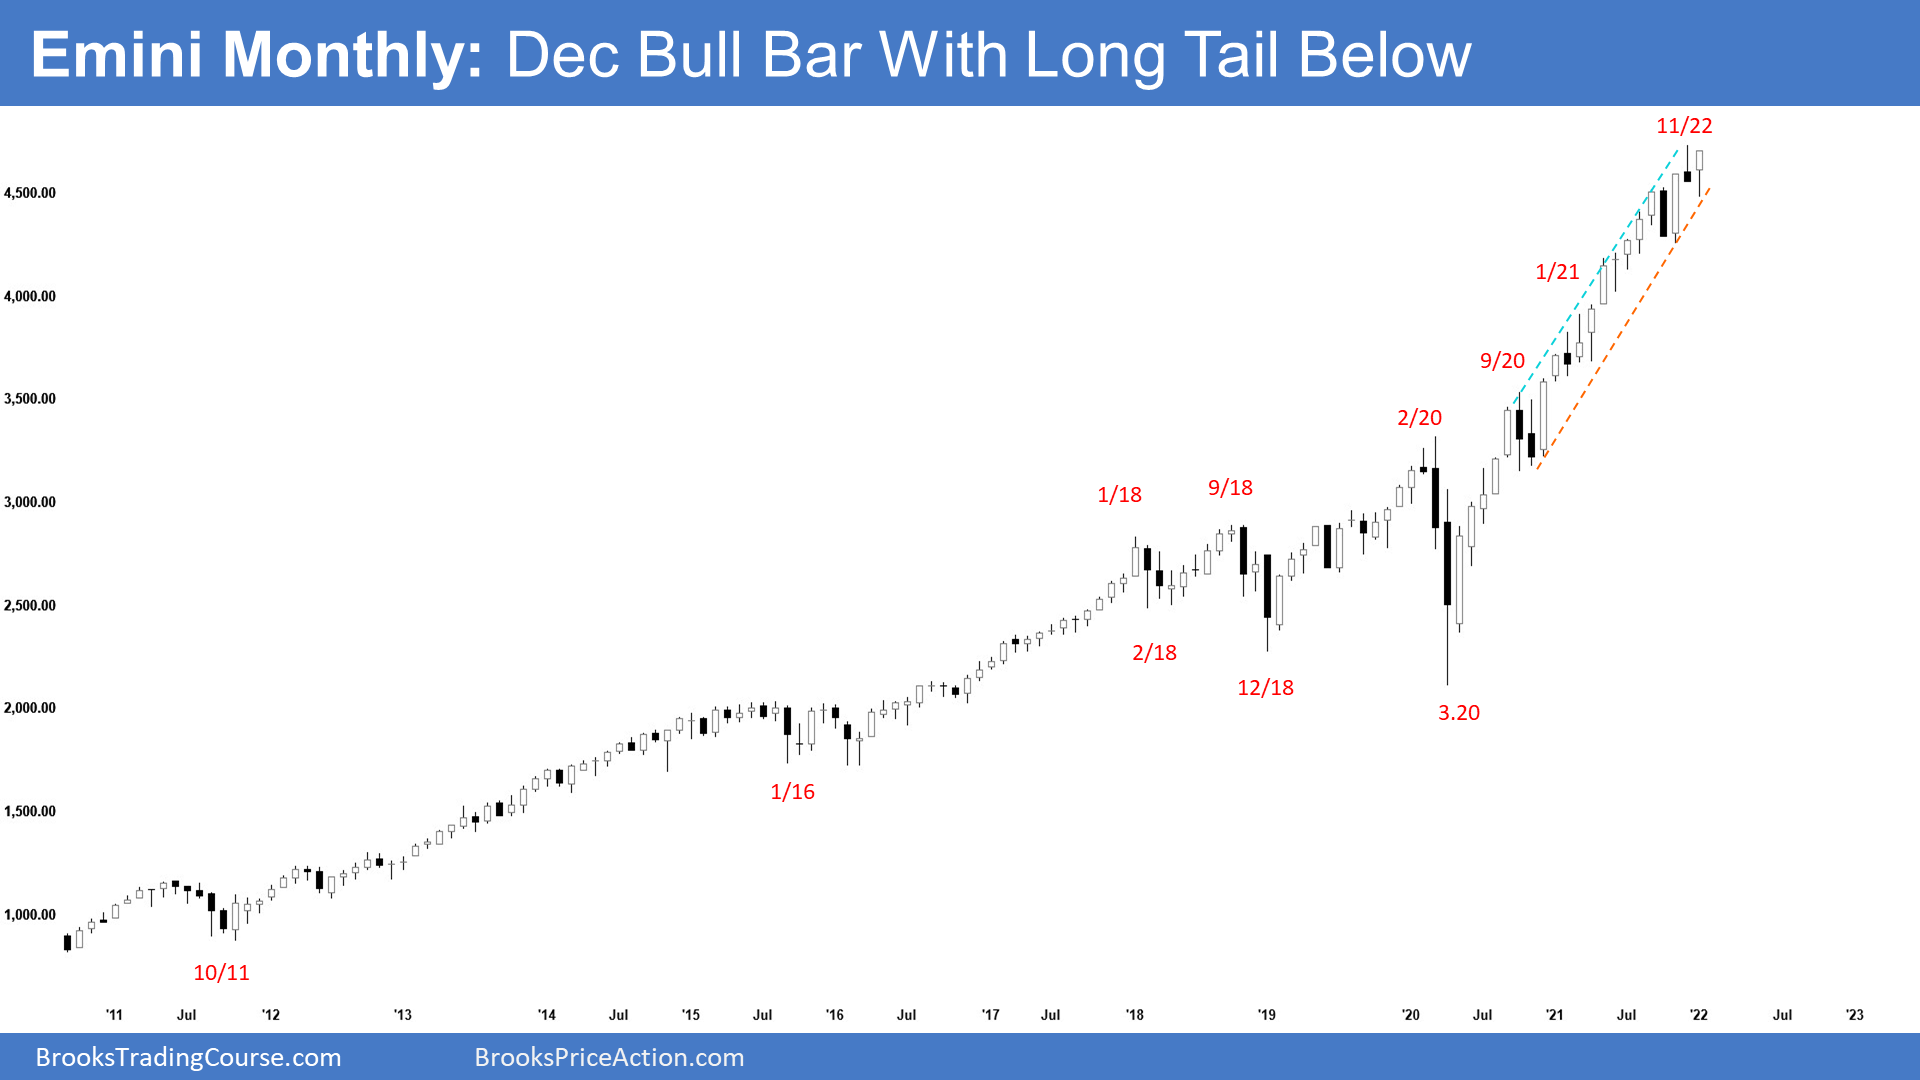 SP500 Emini Monthly Chart December Bull Bar with Long Tail Below. Likely new all-time high around 4800.